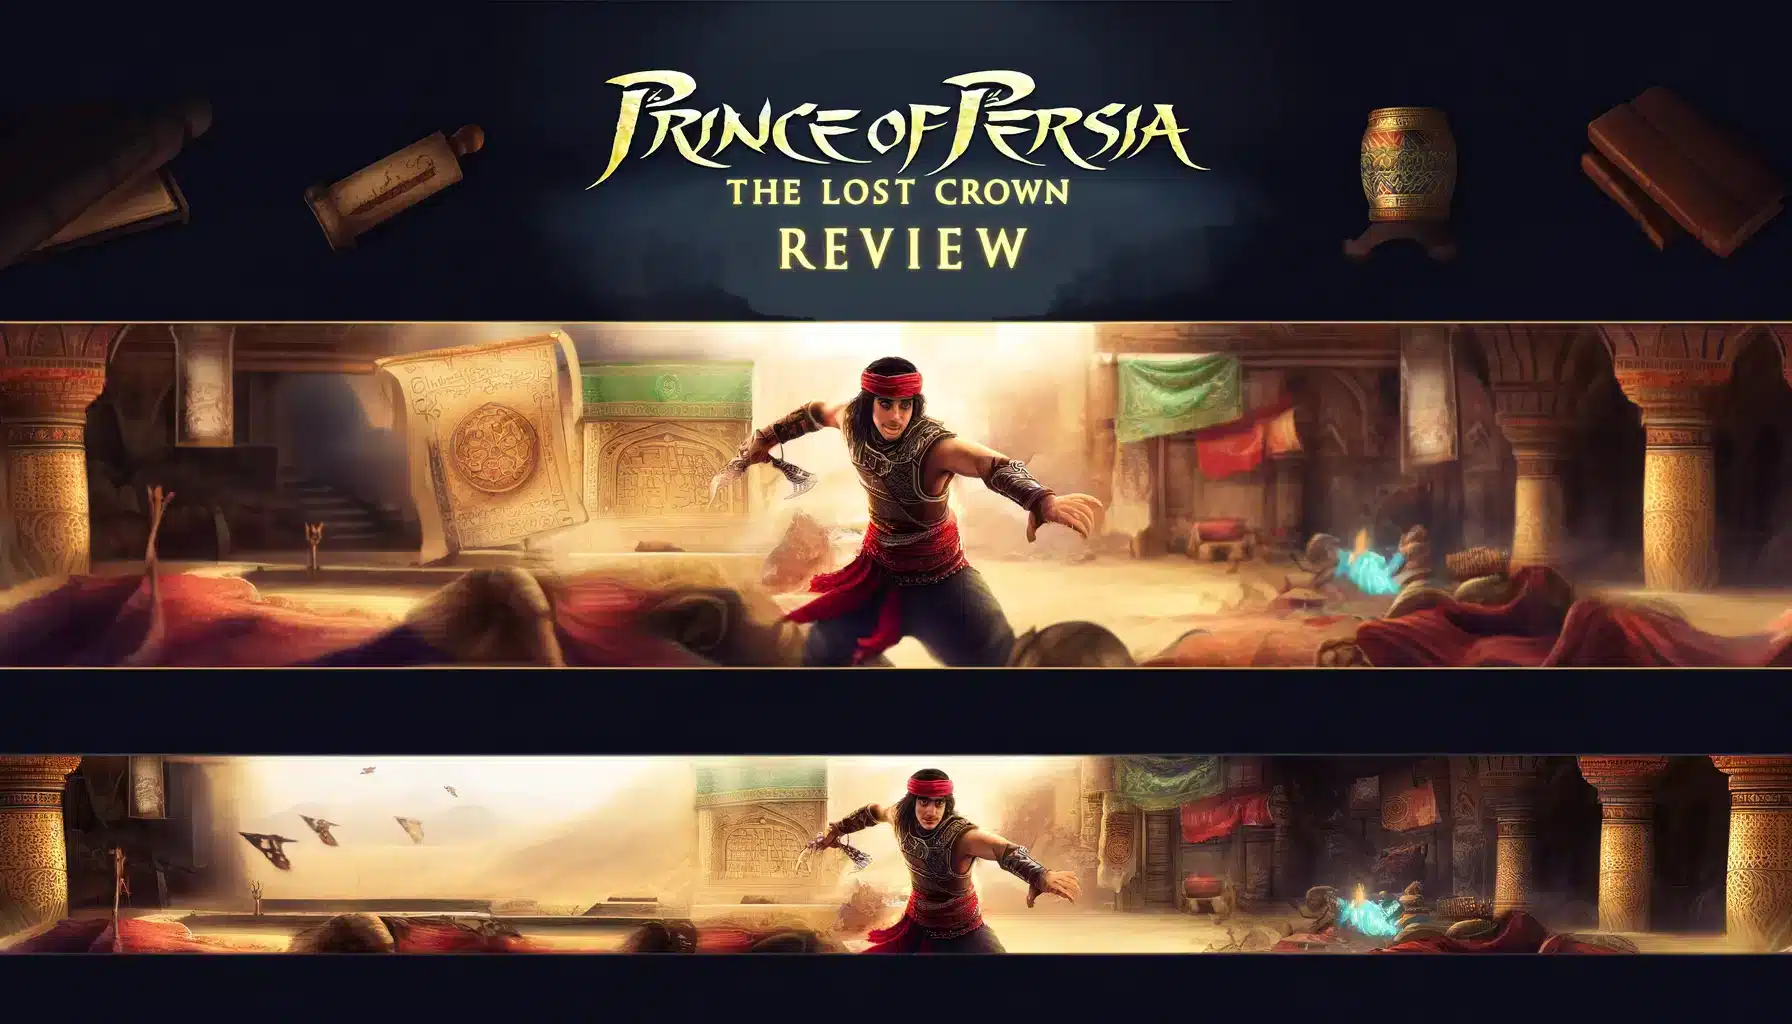 Prince of Persia Returns: The Lost Crown Review